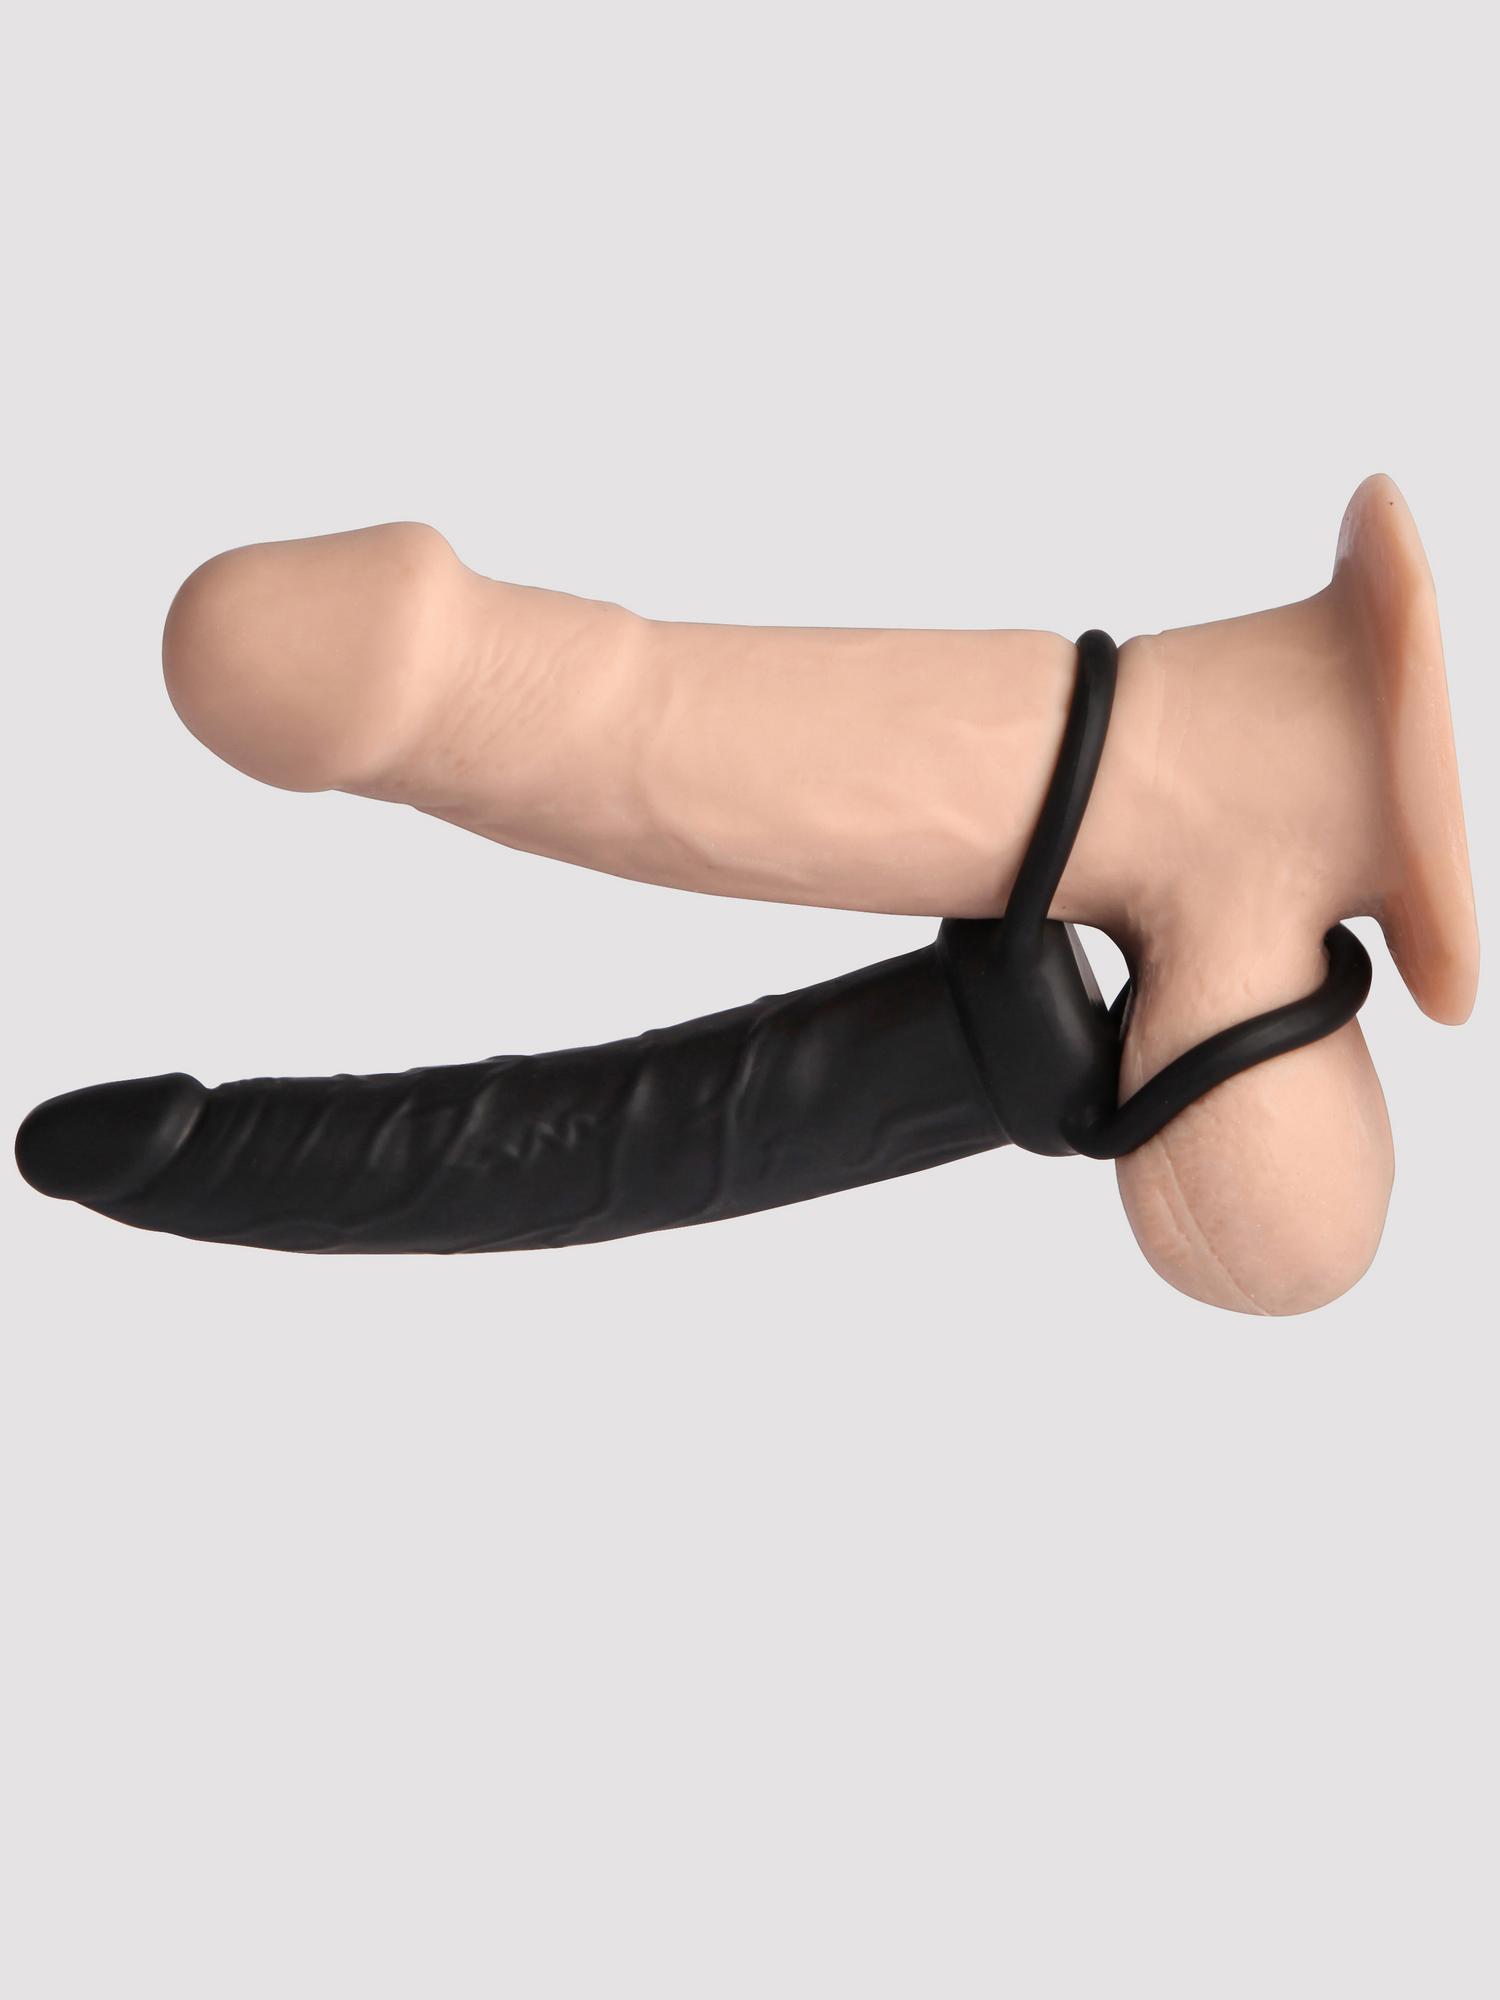 Love Rider Double Penetration Strap-On